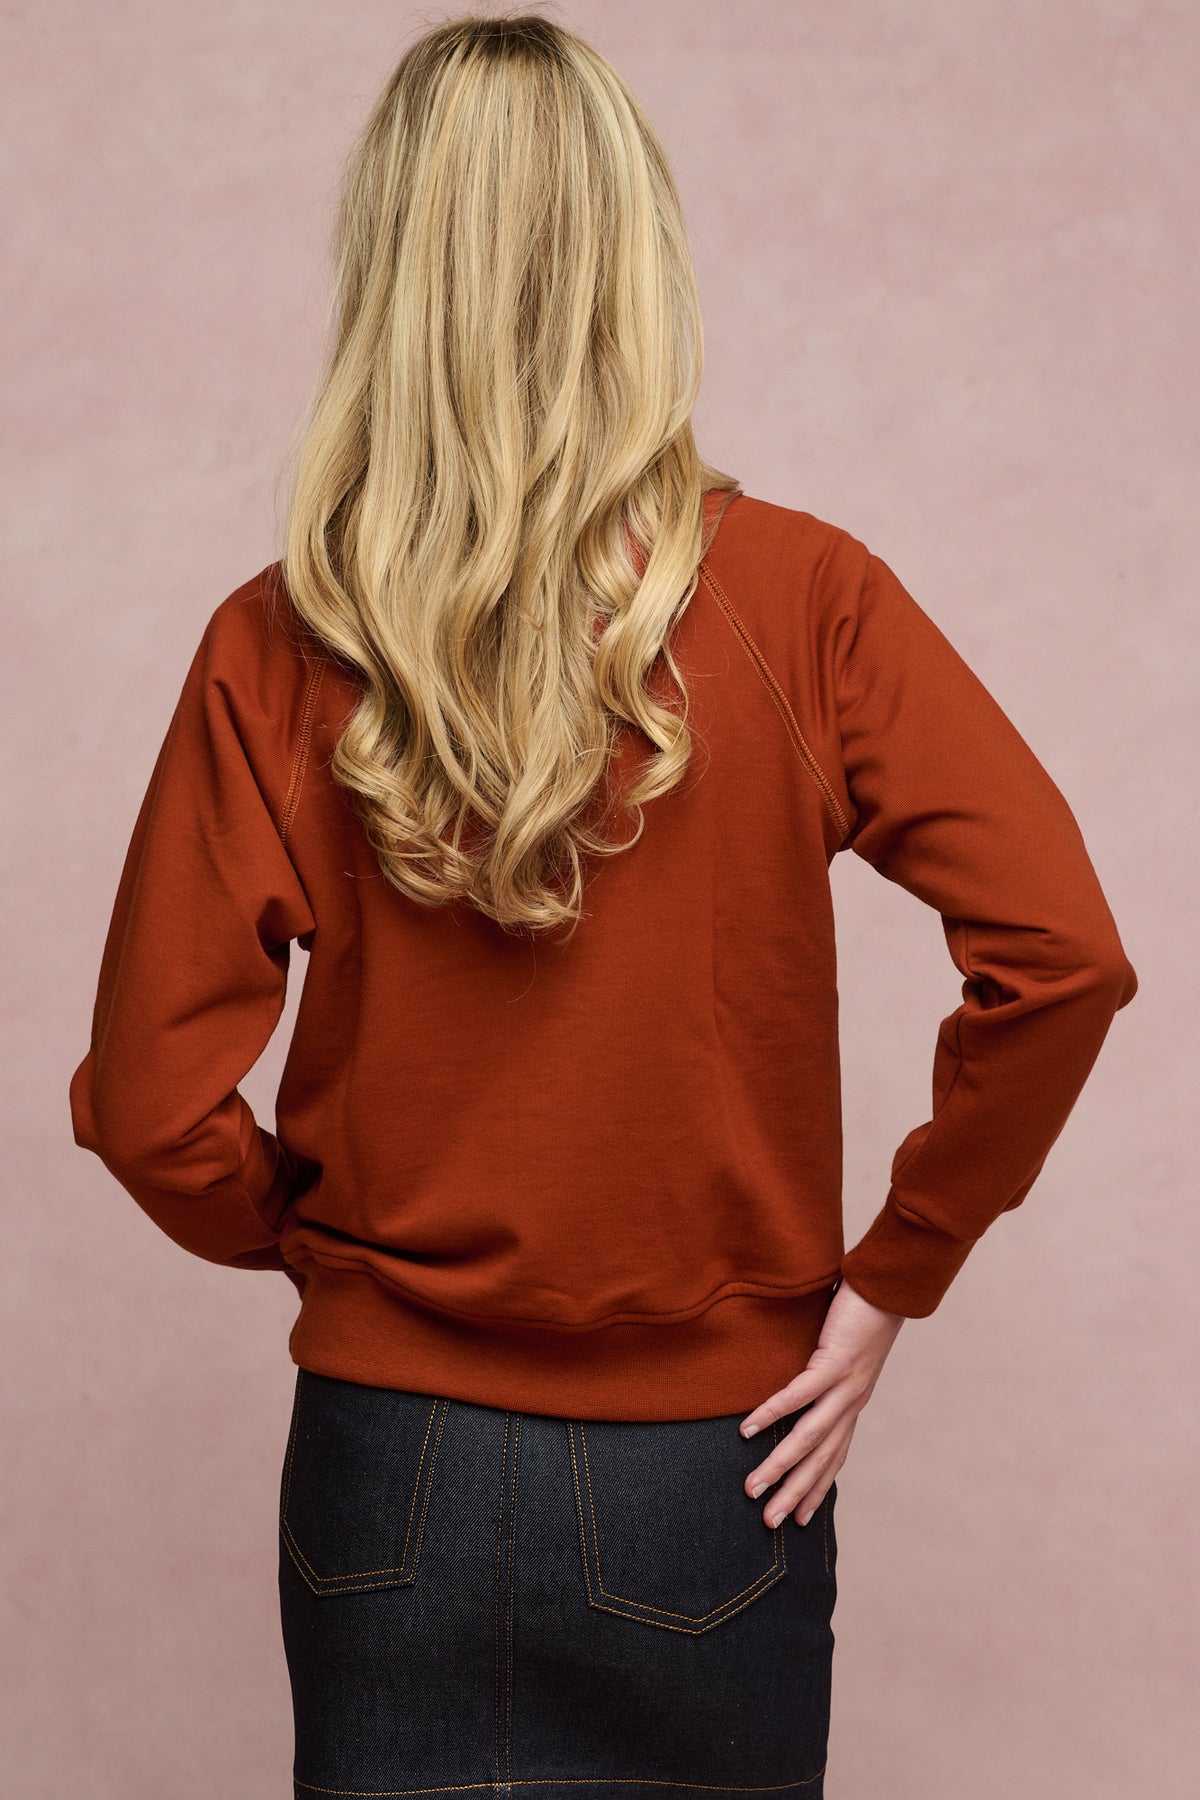 
            Thigh up image of the back of female with long blonde curled hair wearing raglan sweatshirt in cinnamon